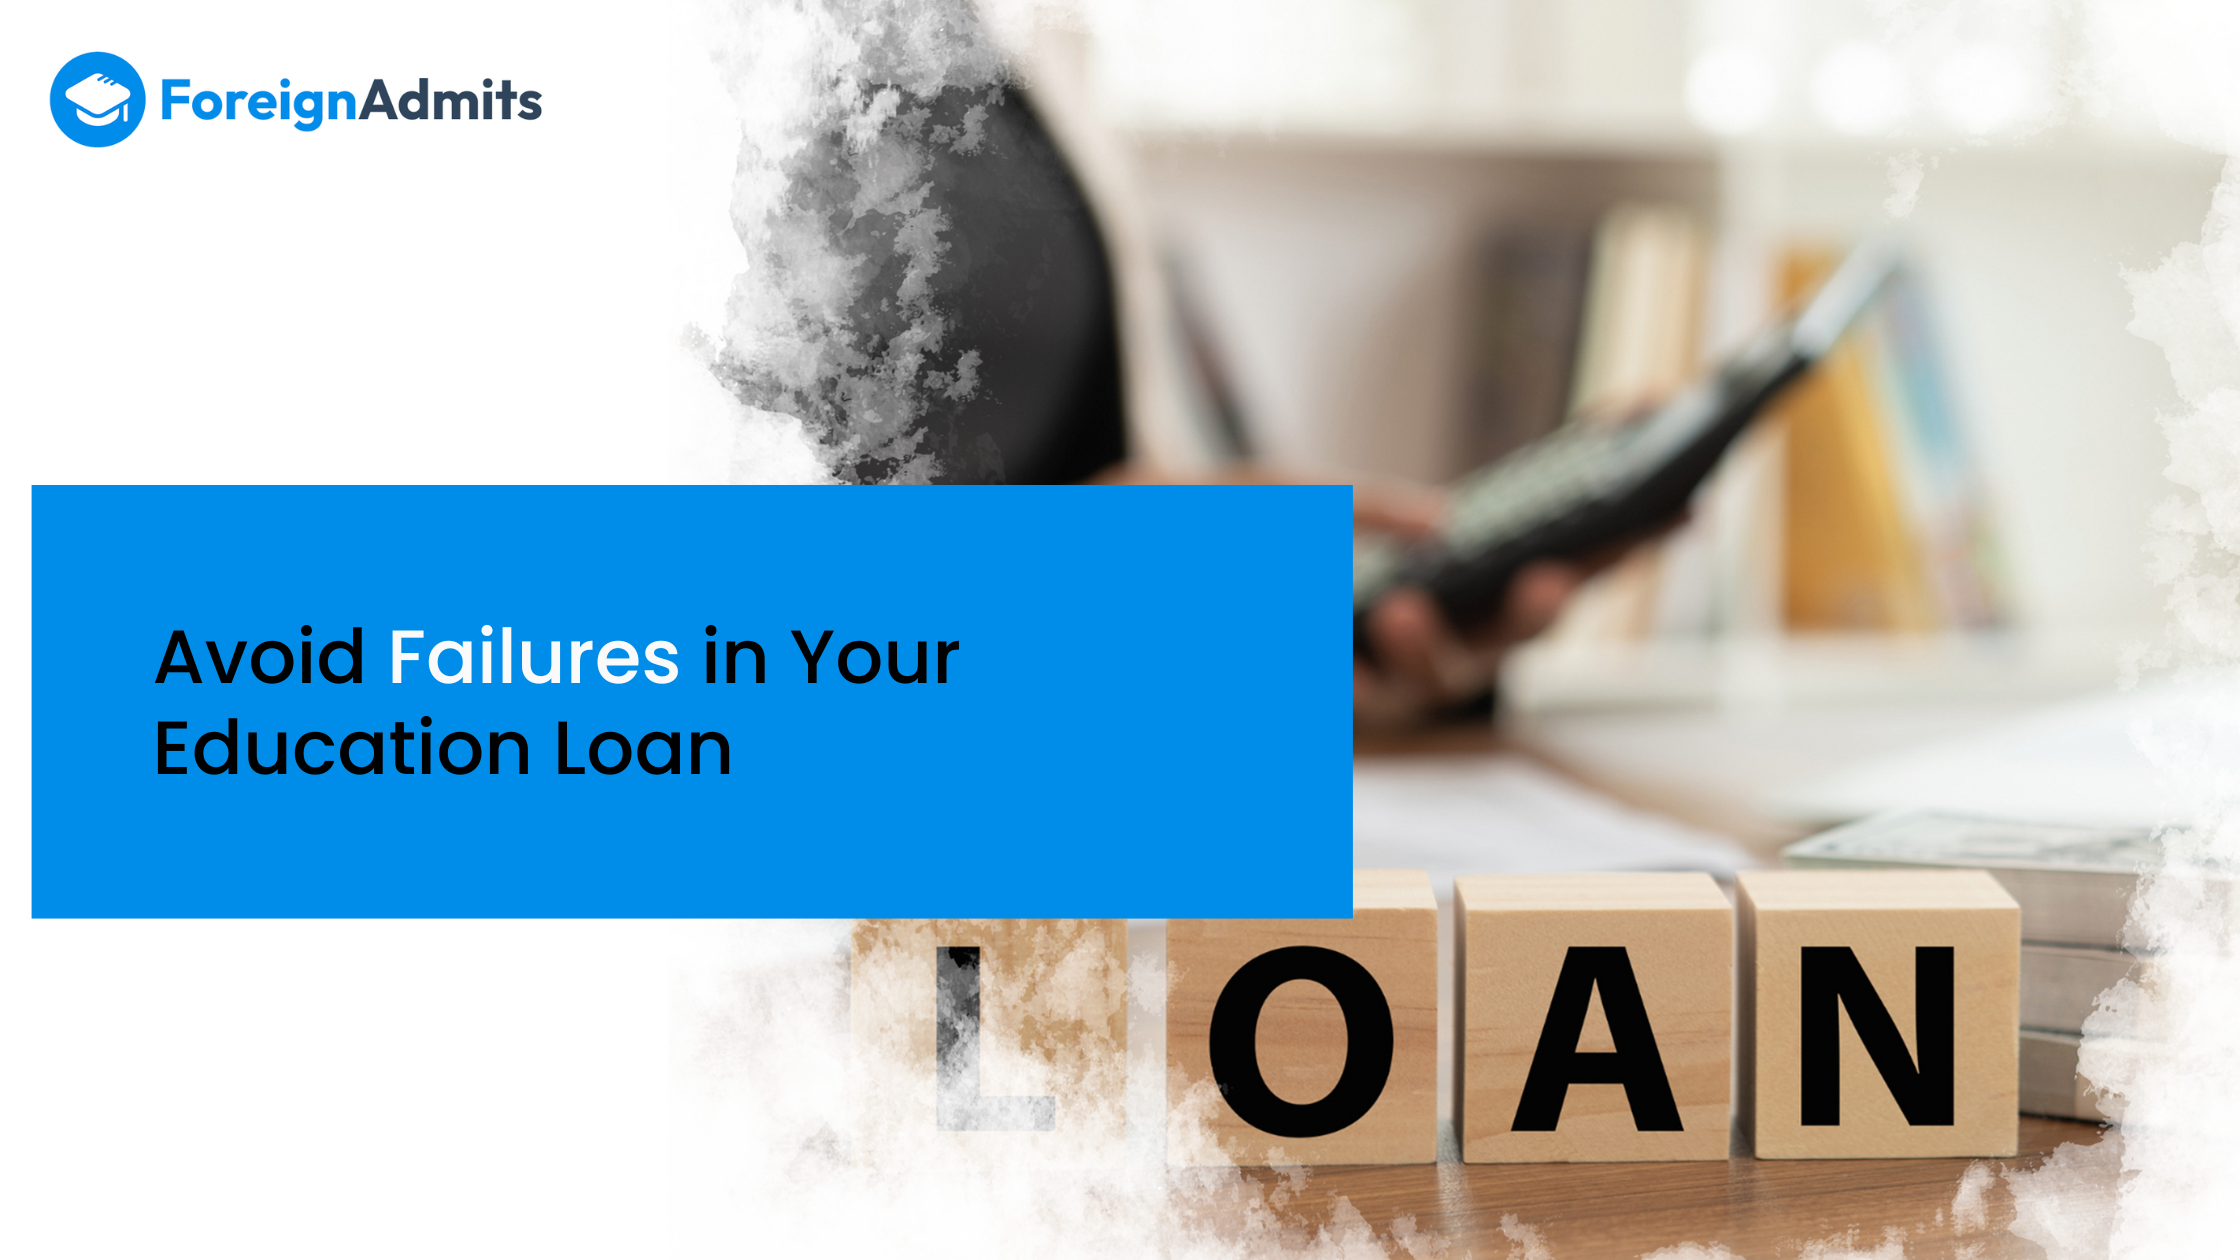 Avoid Failures in Your Education Loan